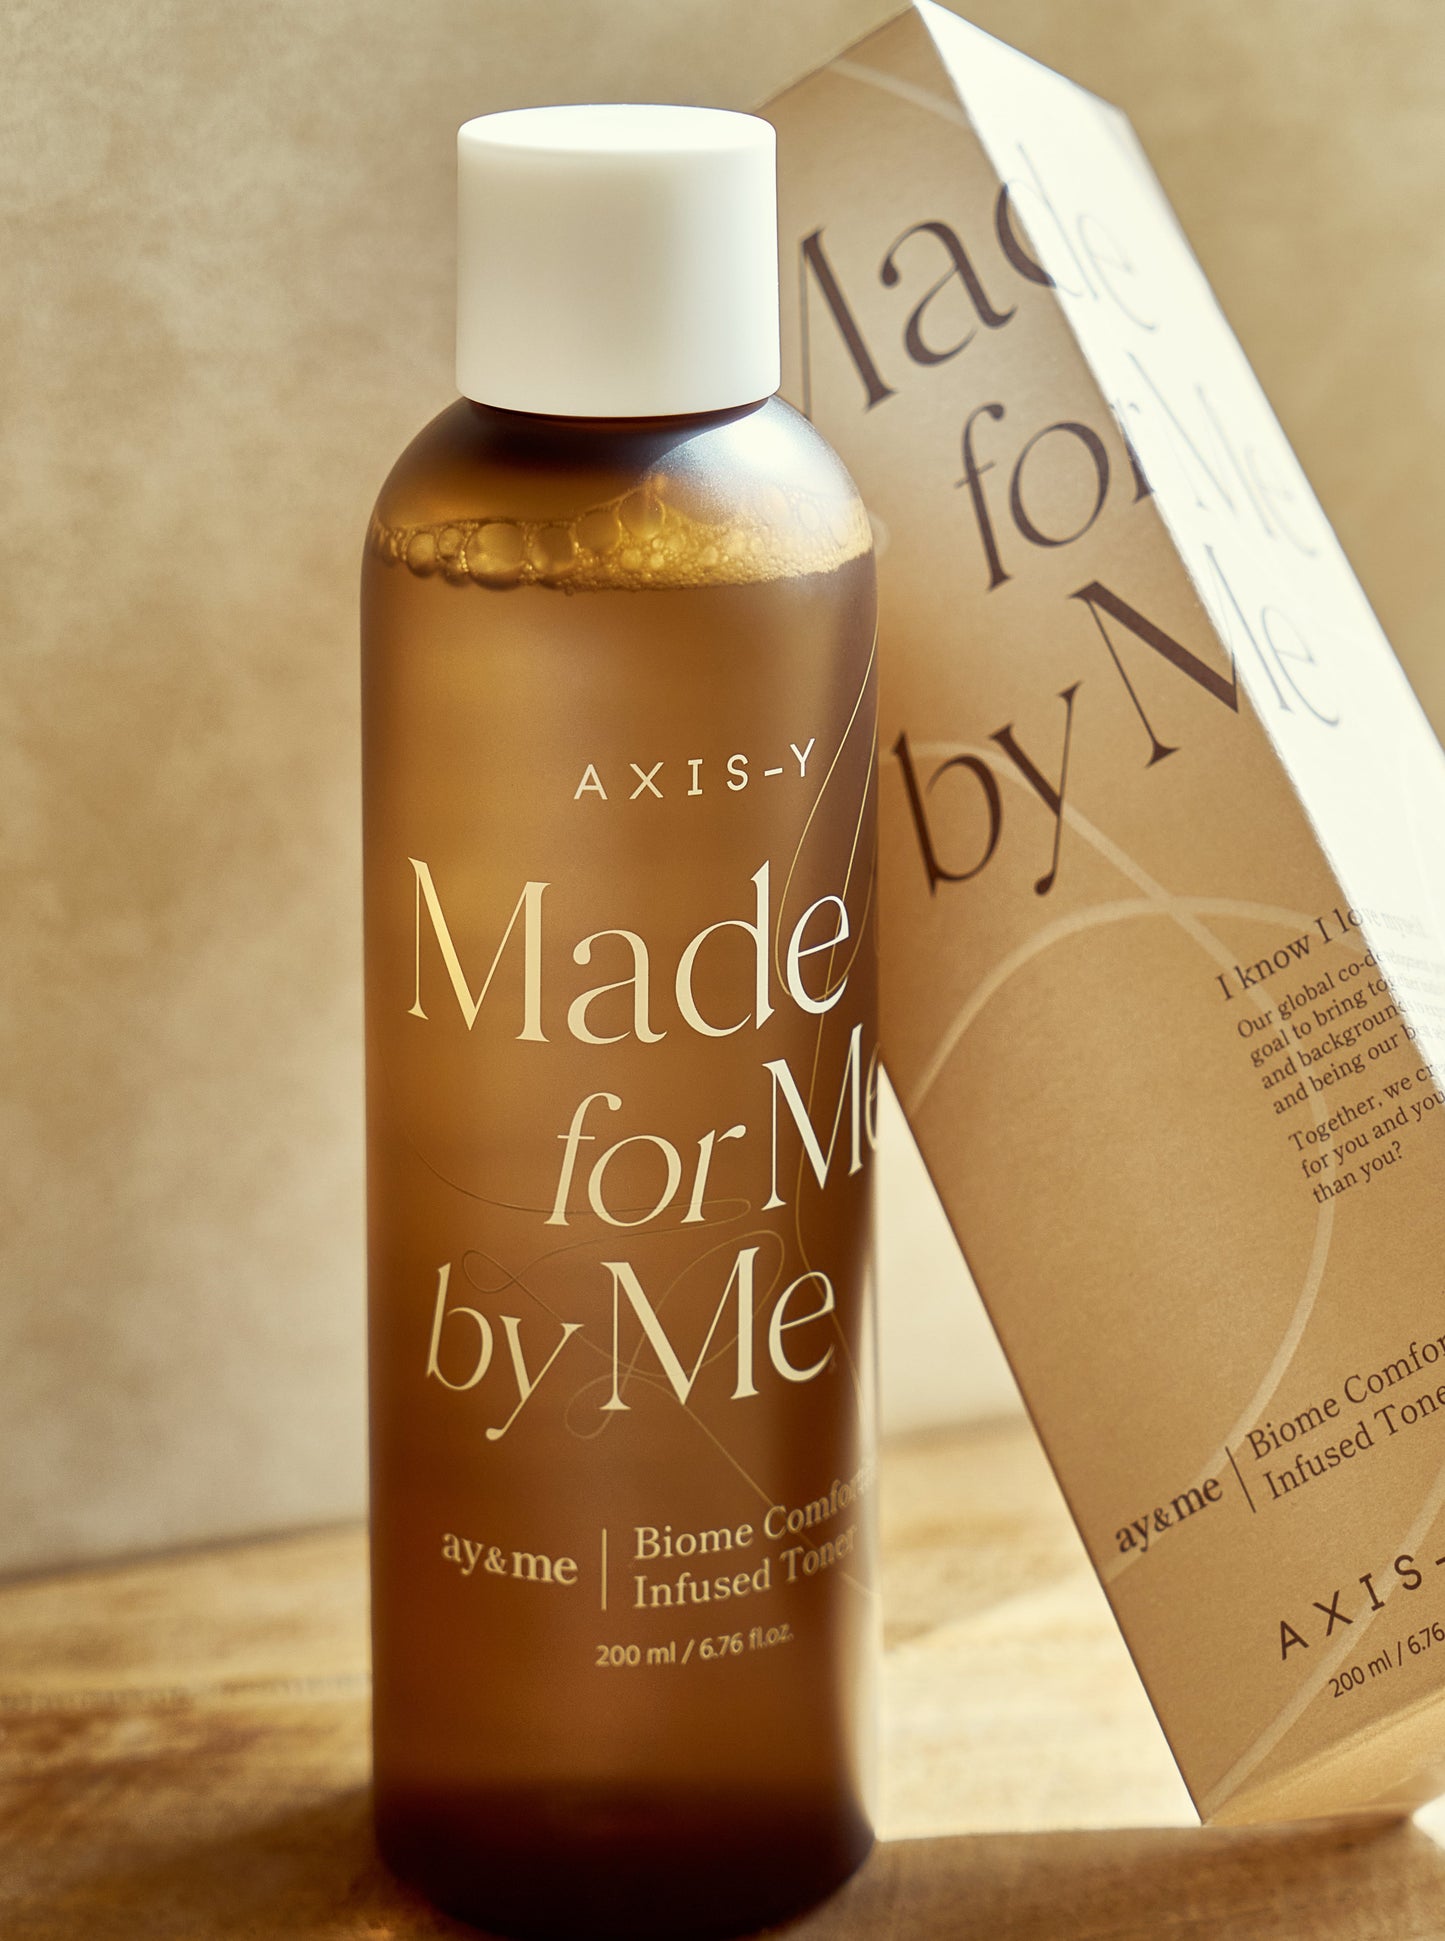 AXISY Biome Comforting Infused Toner